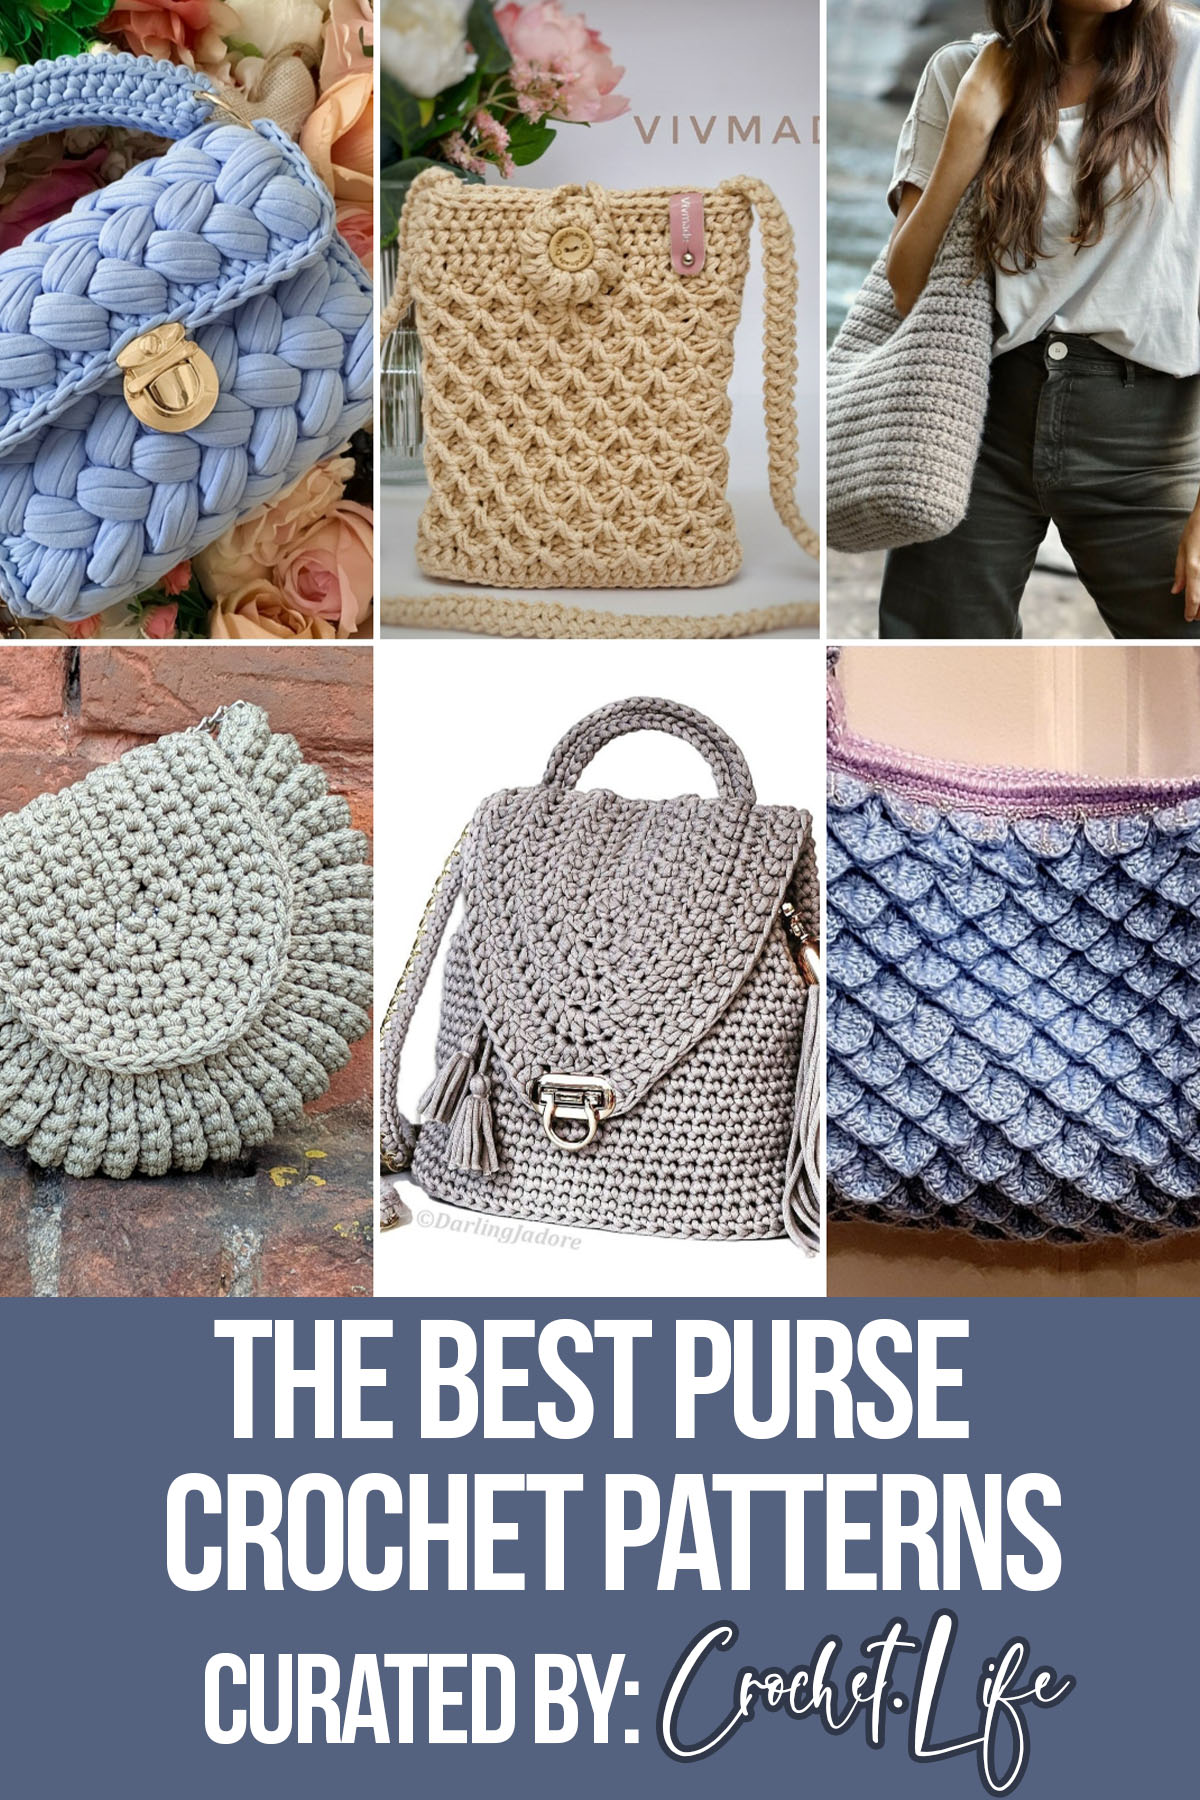 photo collage of crochet patterns for purses with text which reads the best purse crochet patterns curated by crochet.life